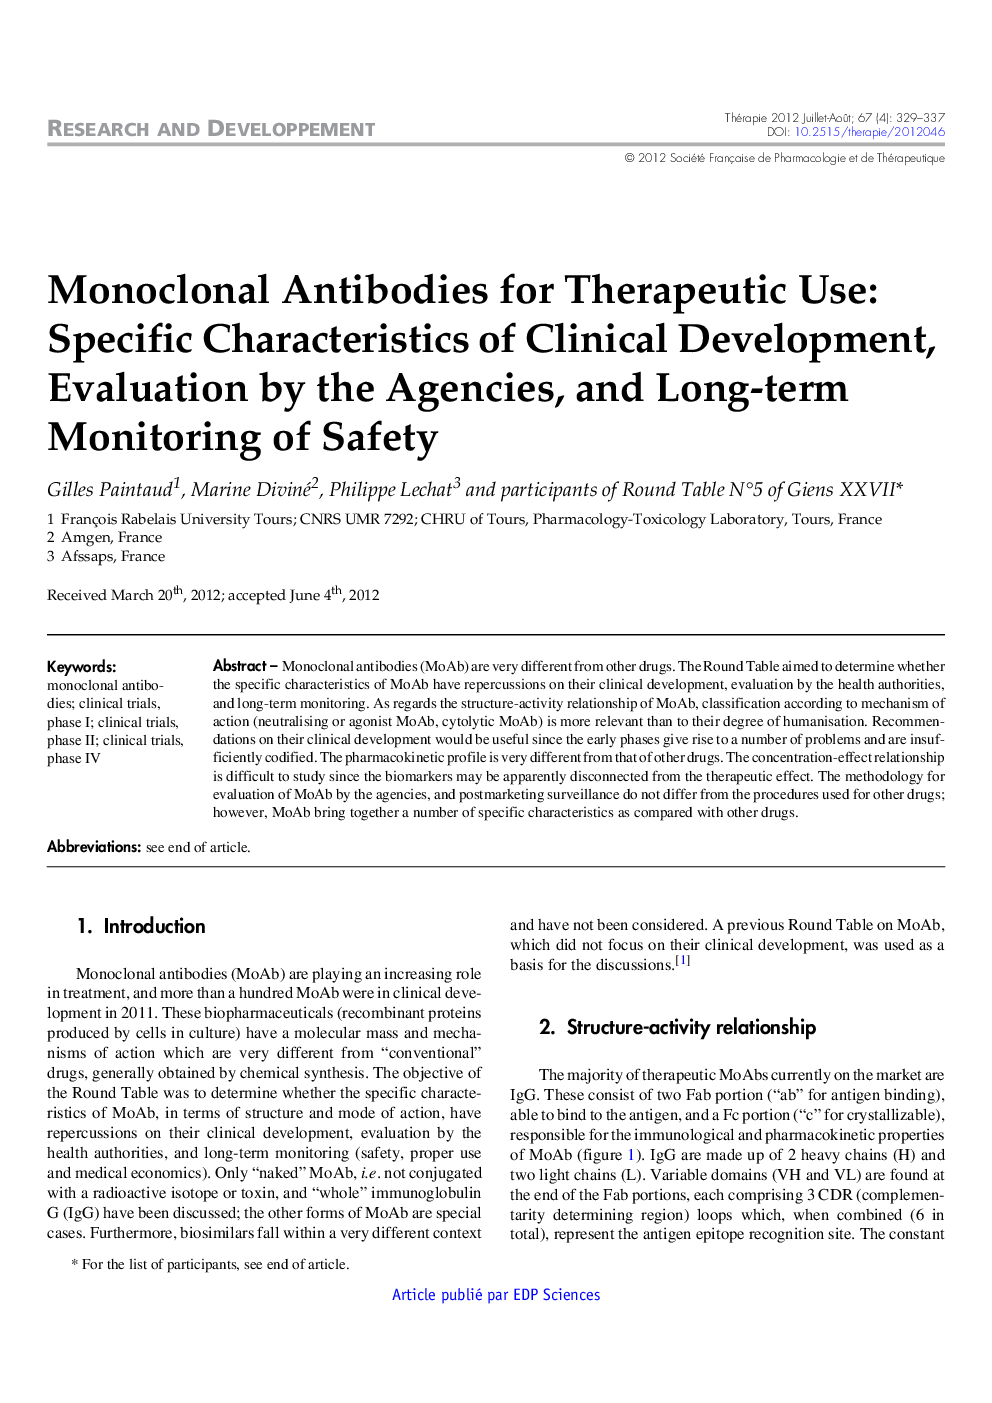 Monoclonal Antibodies for Therapeutic Use: Specific Characteristics of Clinical Development, Evaluation by the Agencies, and Long-term Monitoring of Safety